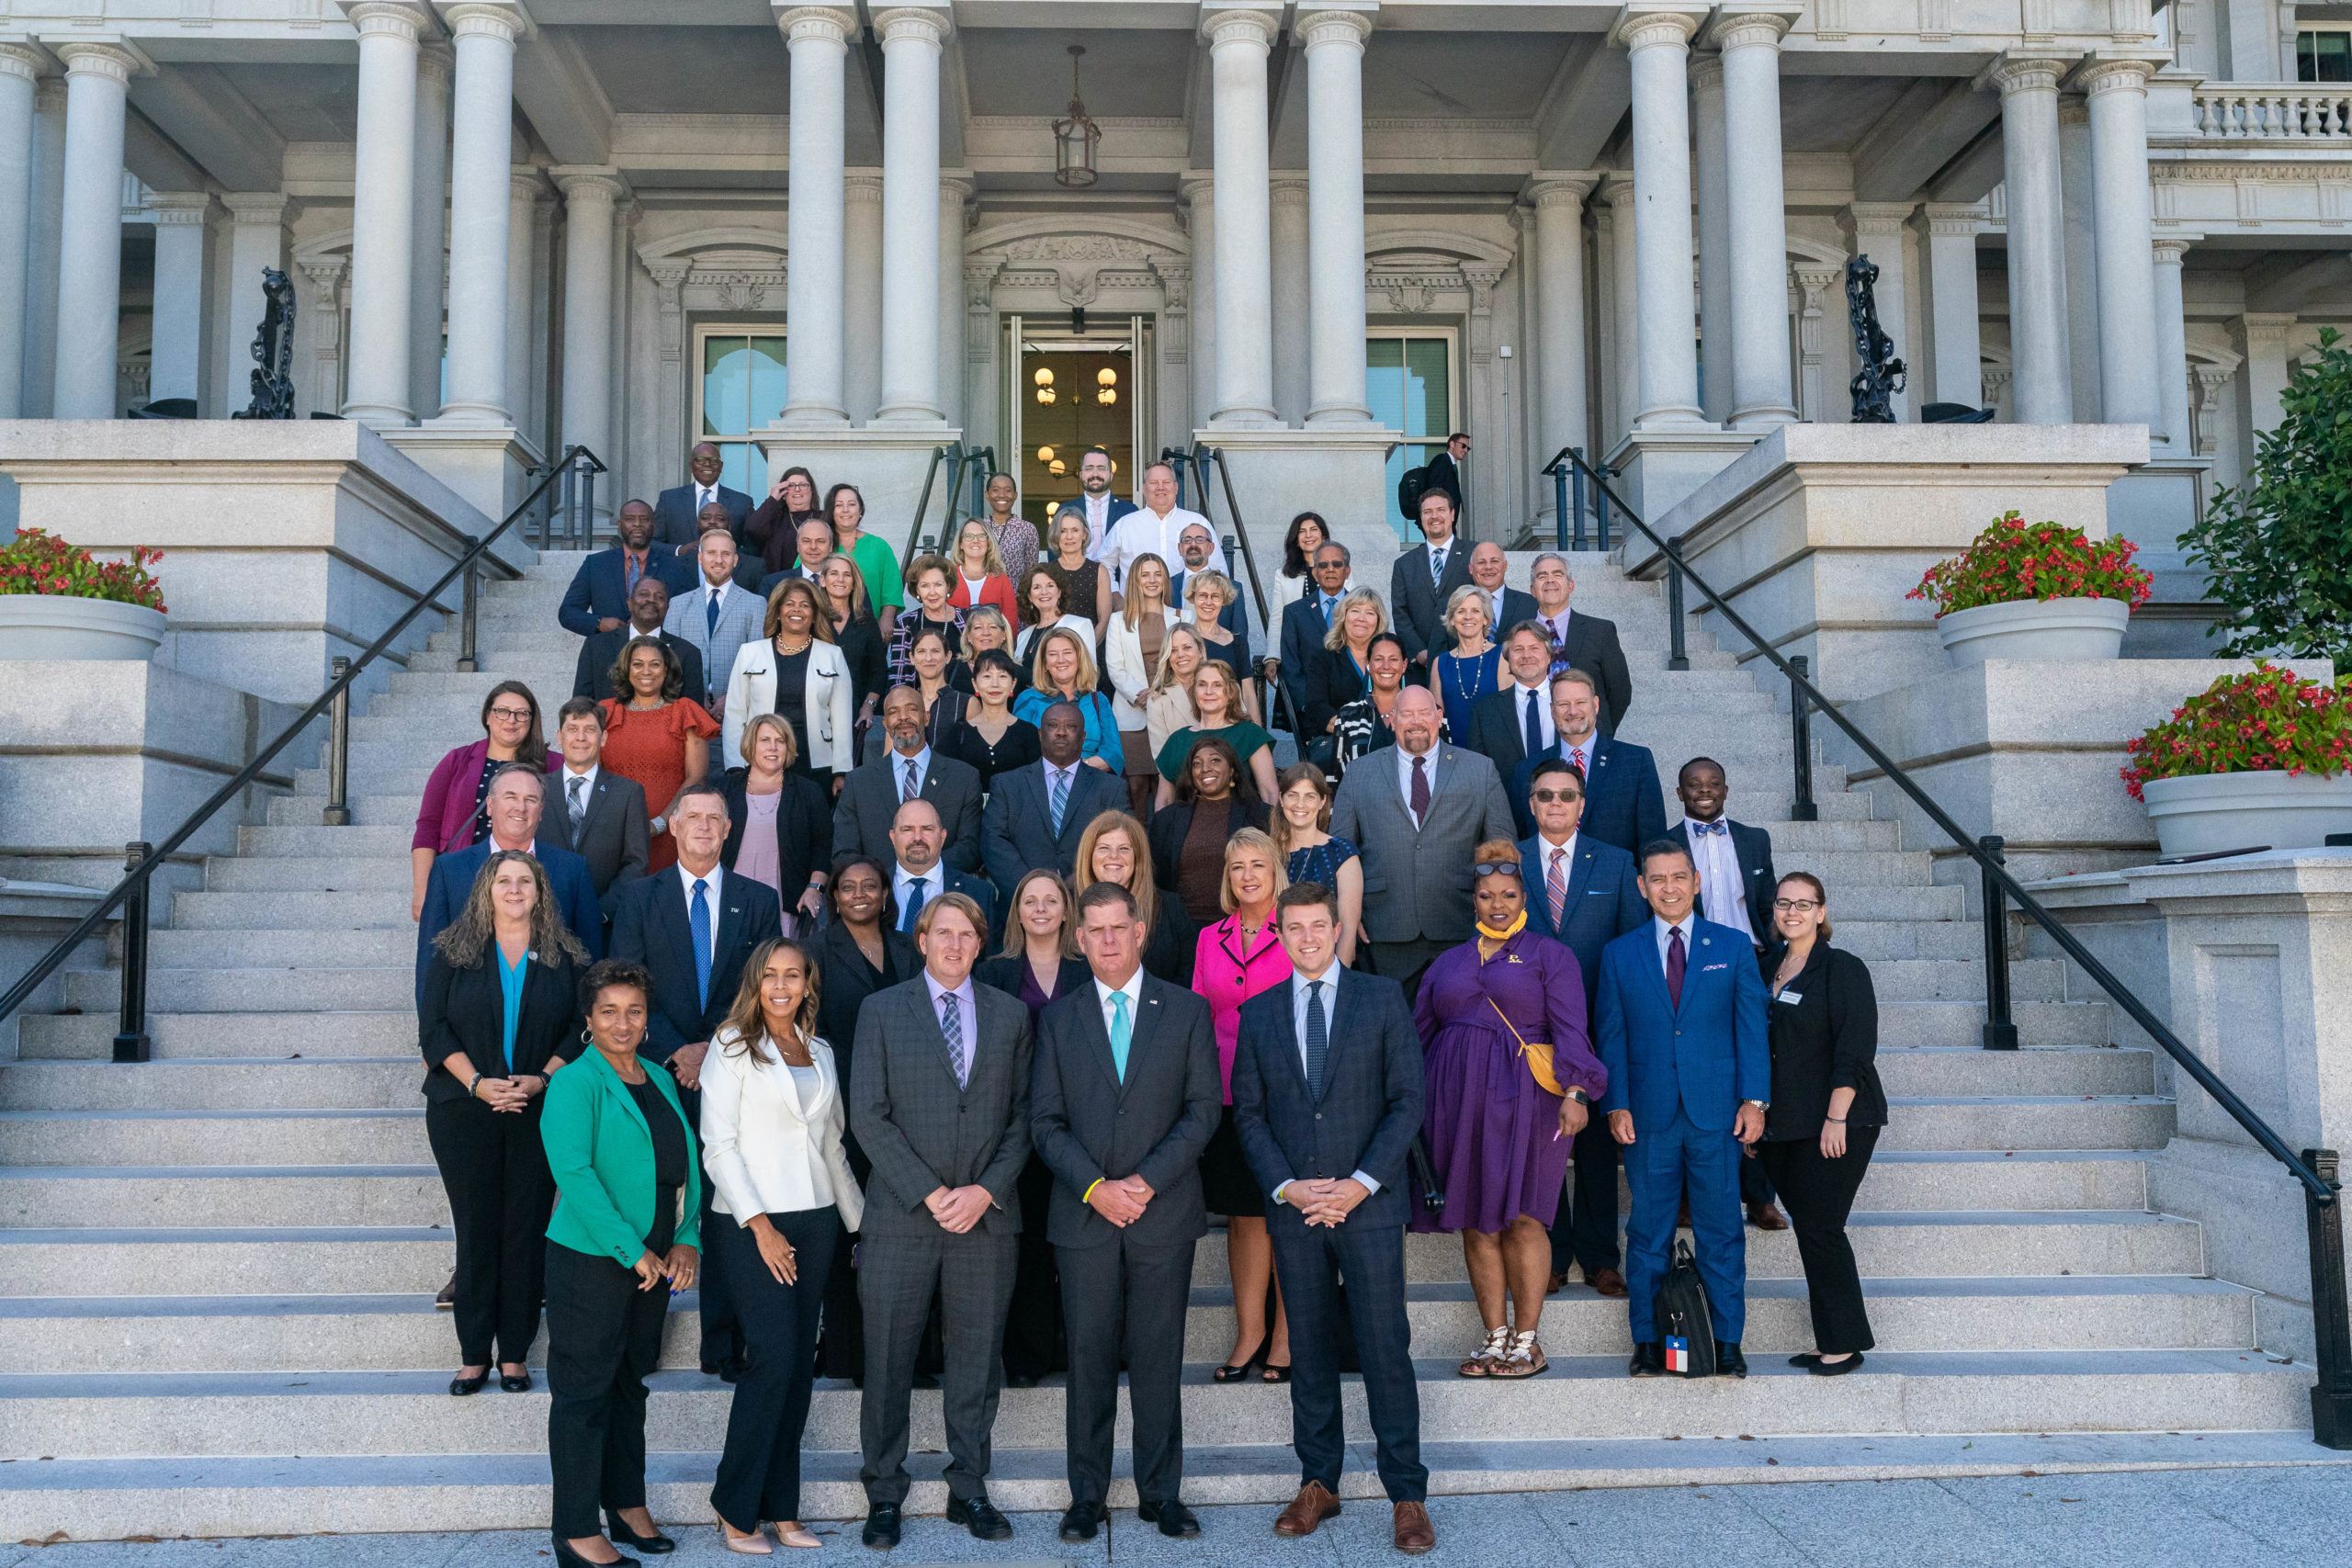 On September 1st, the White House hosted an event for the Apprenticeship Ambassador Initiative to celebrate employers, colleges, and entities across the country working to expand registered apprenticeships.